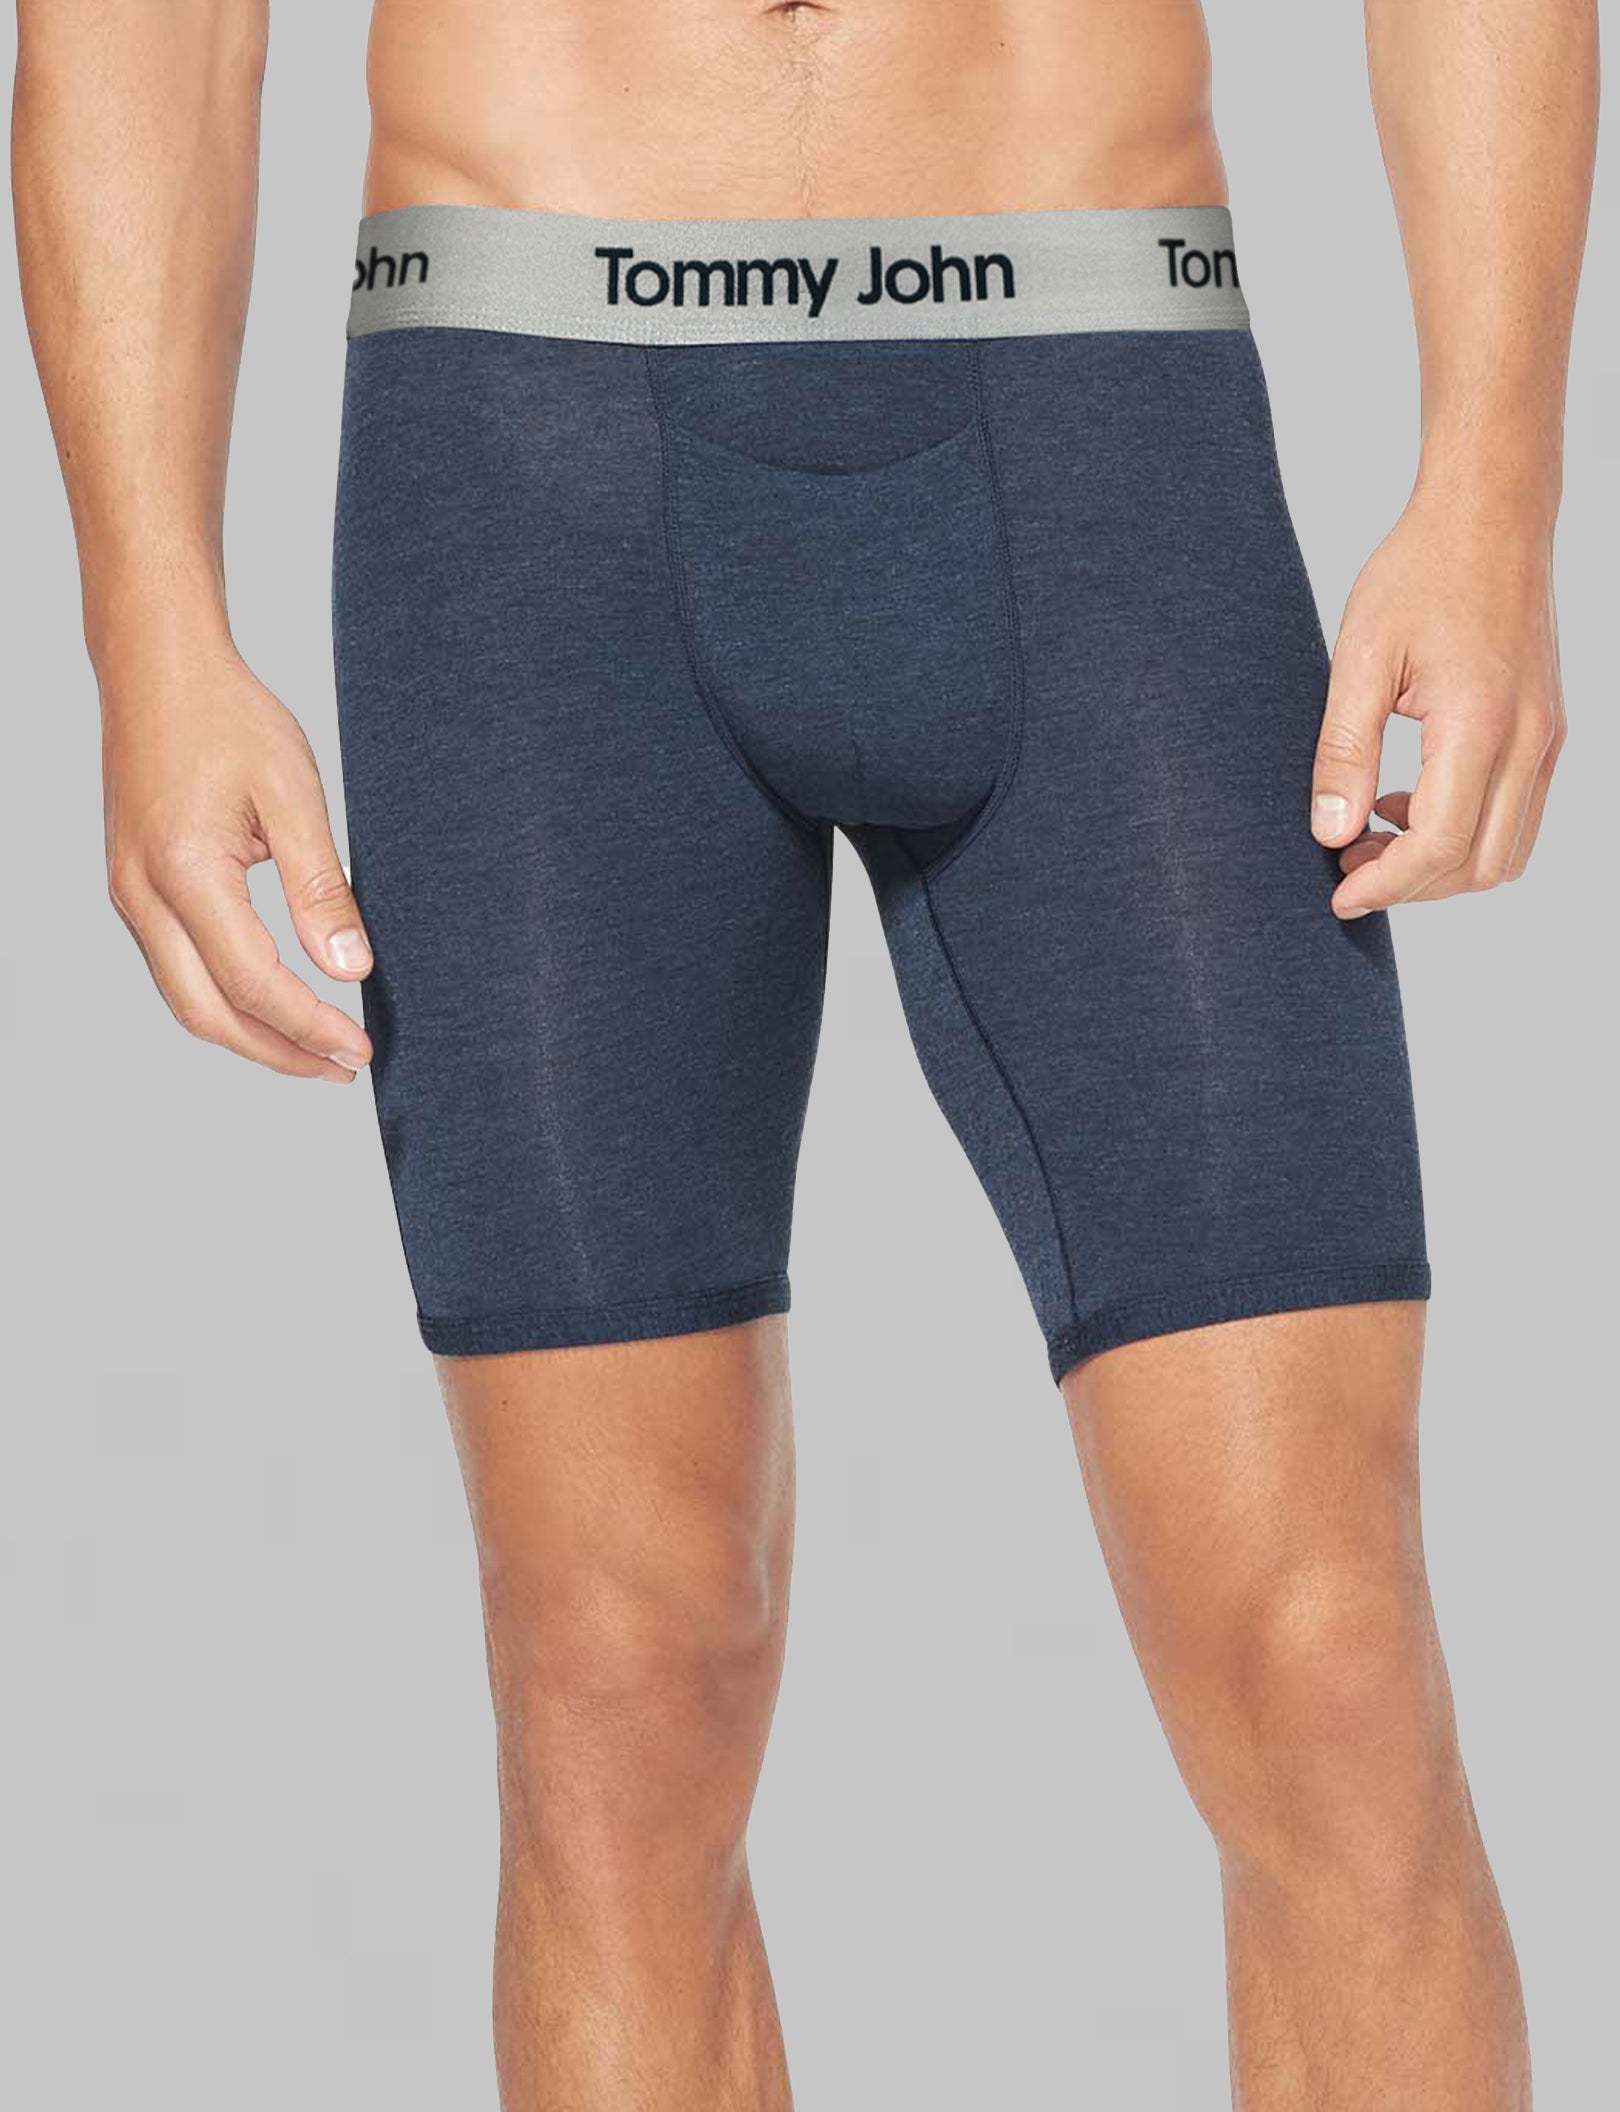 Second Skin Boxer Brief 8 – Tommy John